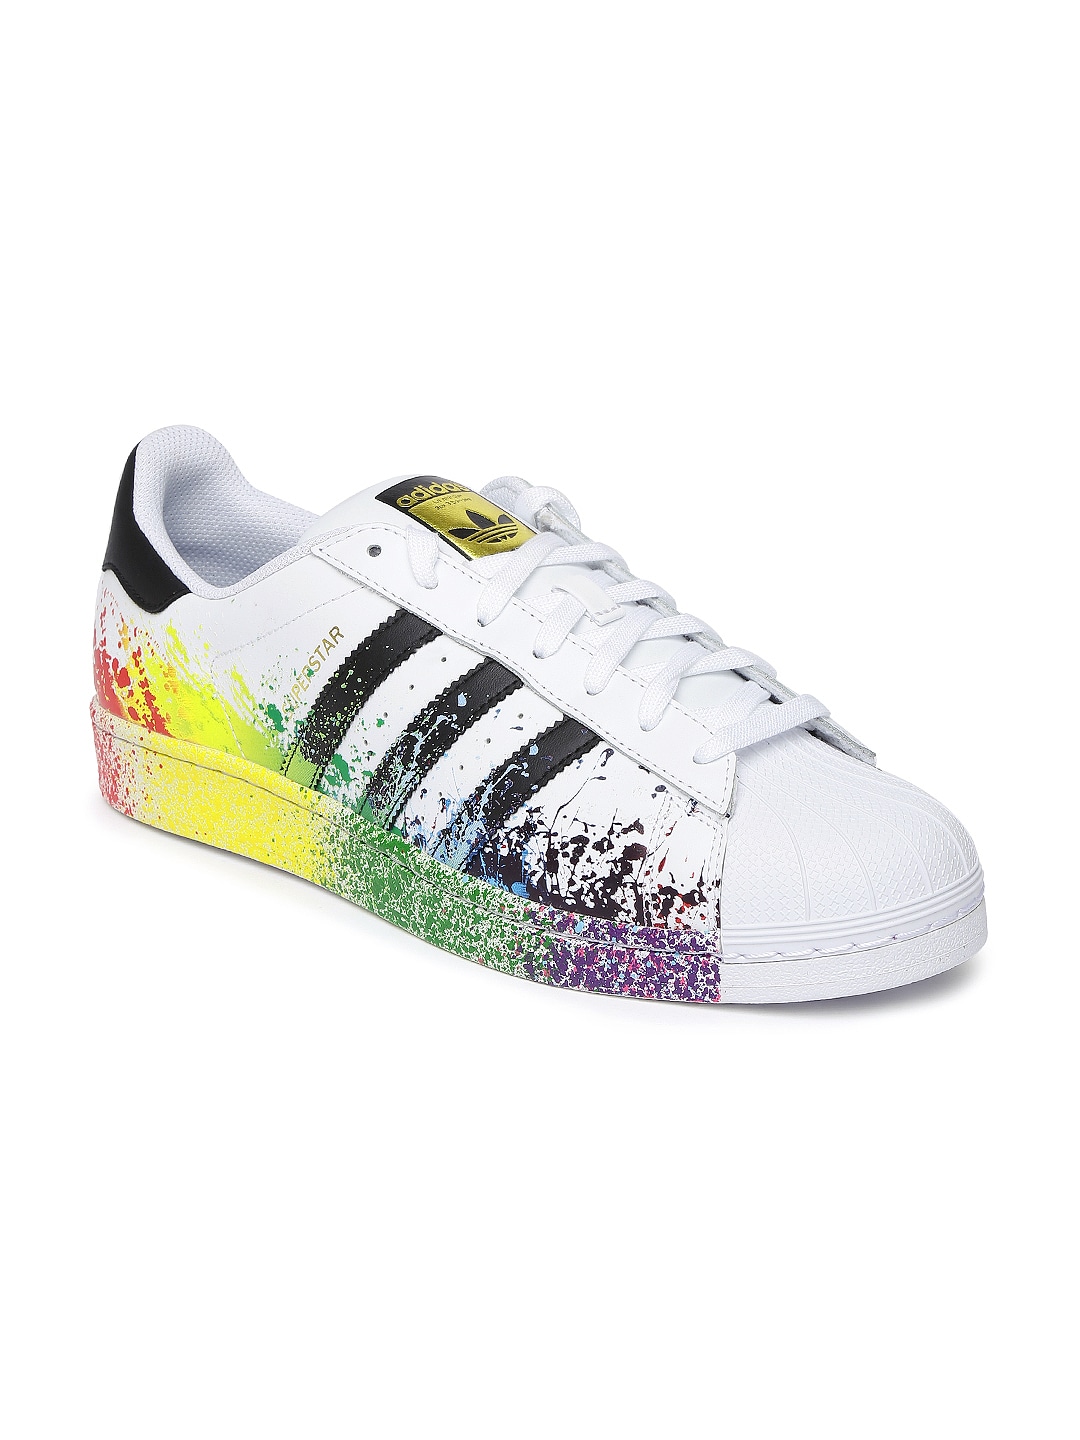 Cheap Adidas Originals Superstar 80s White Sneakers S75836 Caliroots